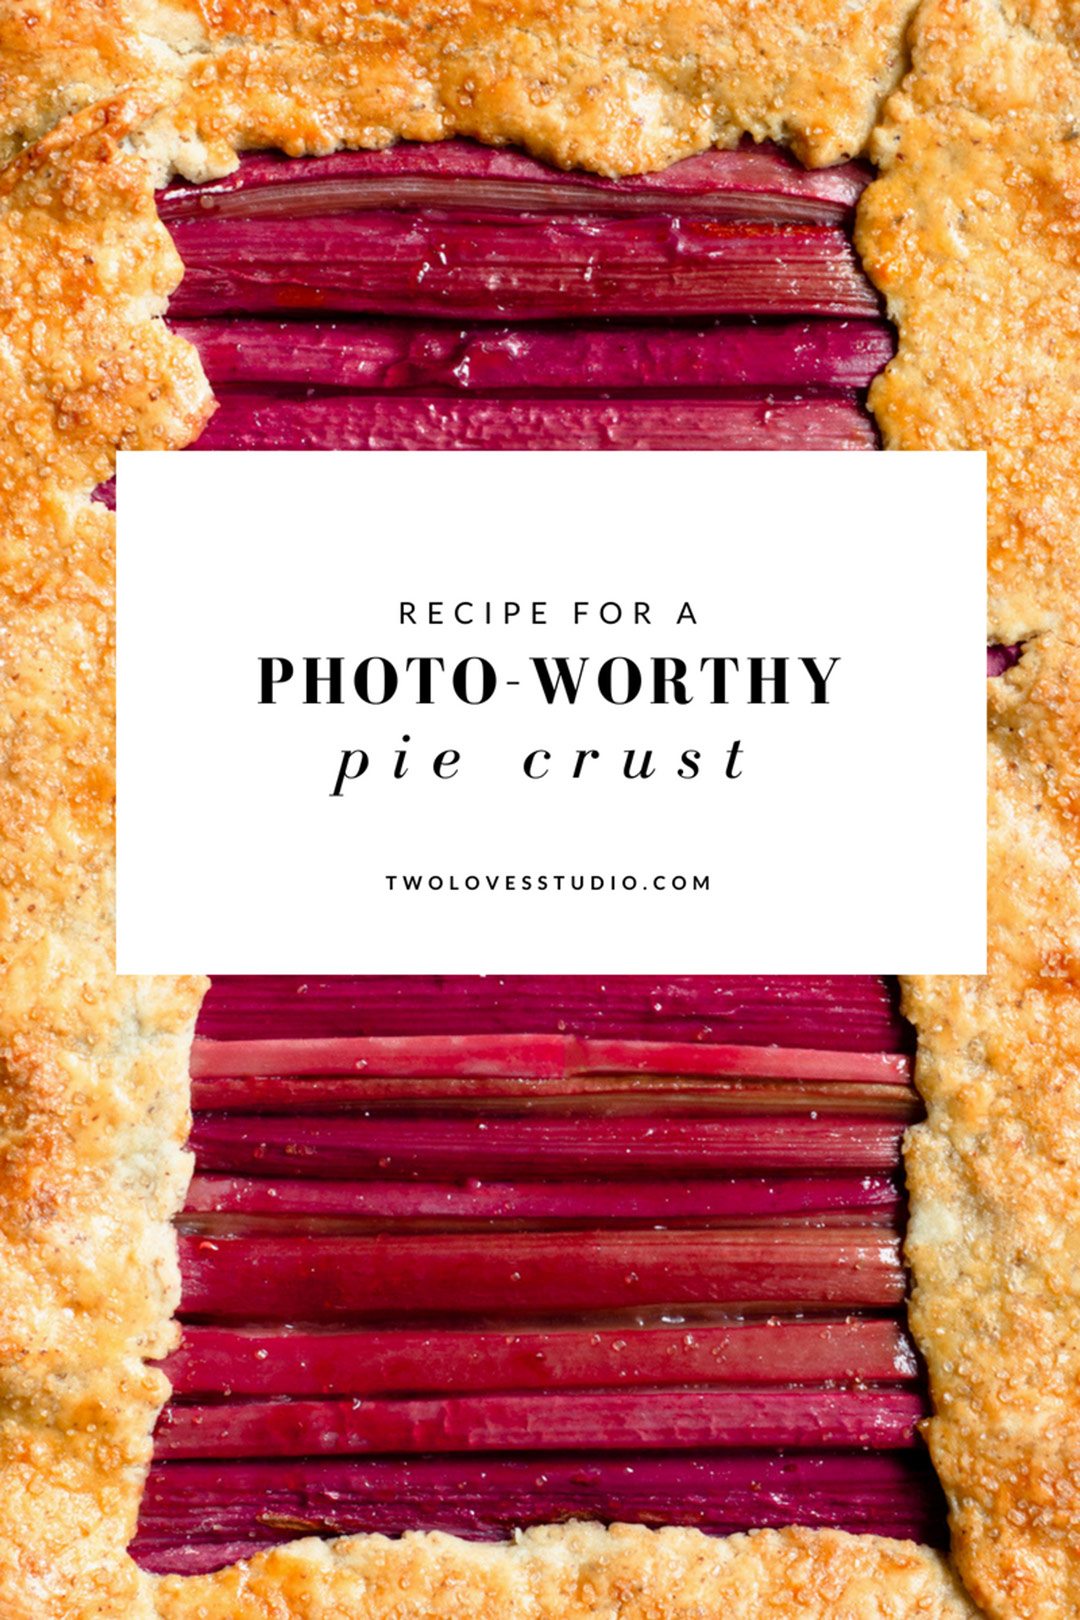 Create photo-worthy pie crust with this easy & beautiful pastry recipe. Get ready to shoot beautiful pies!